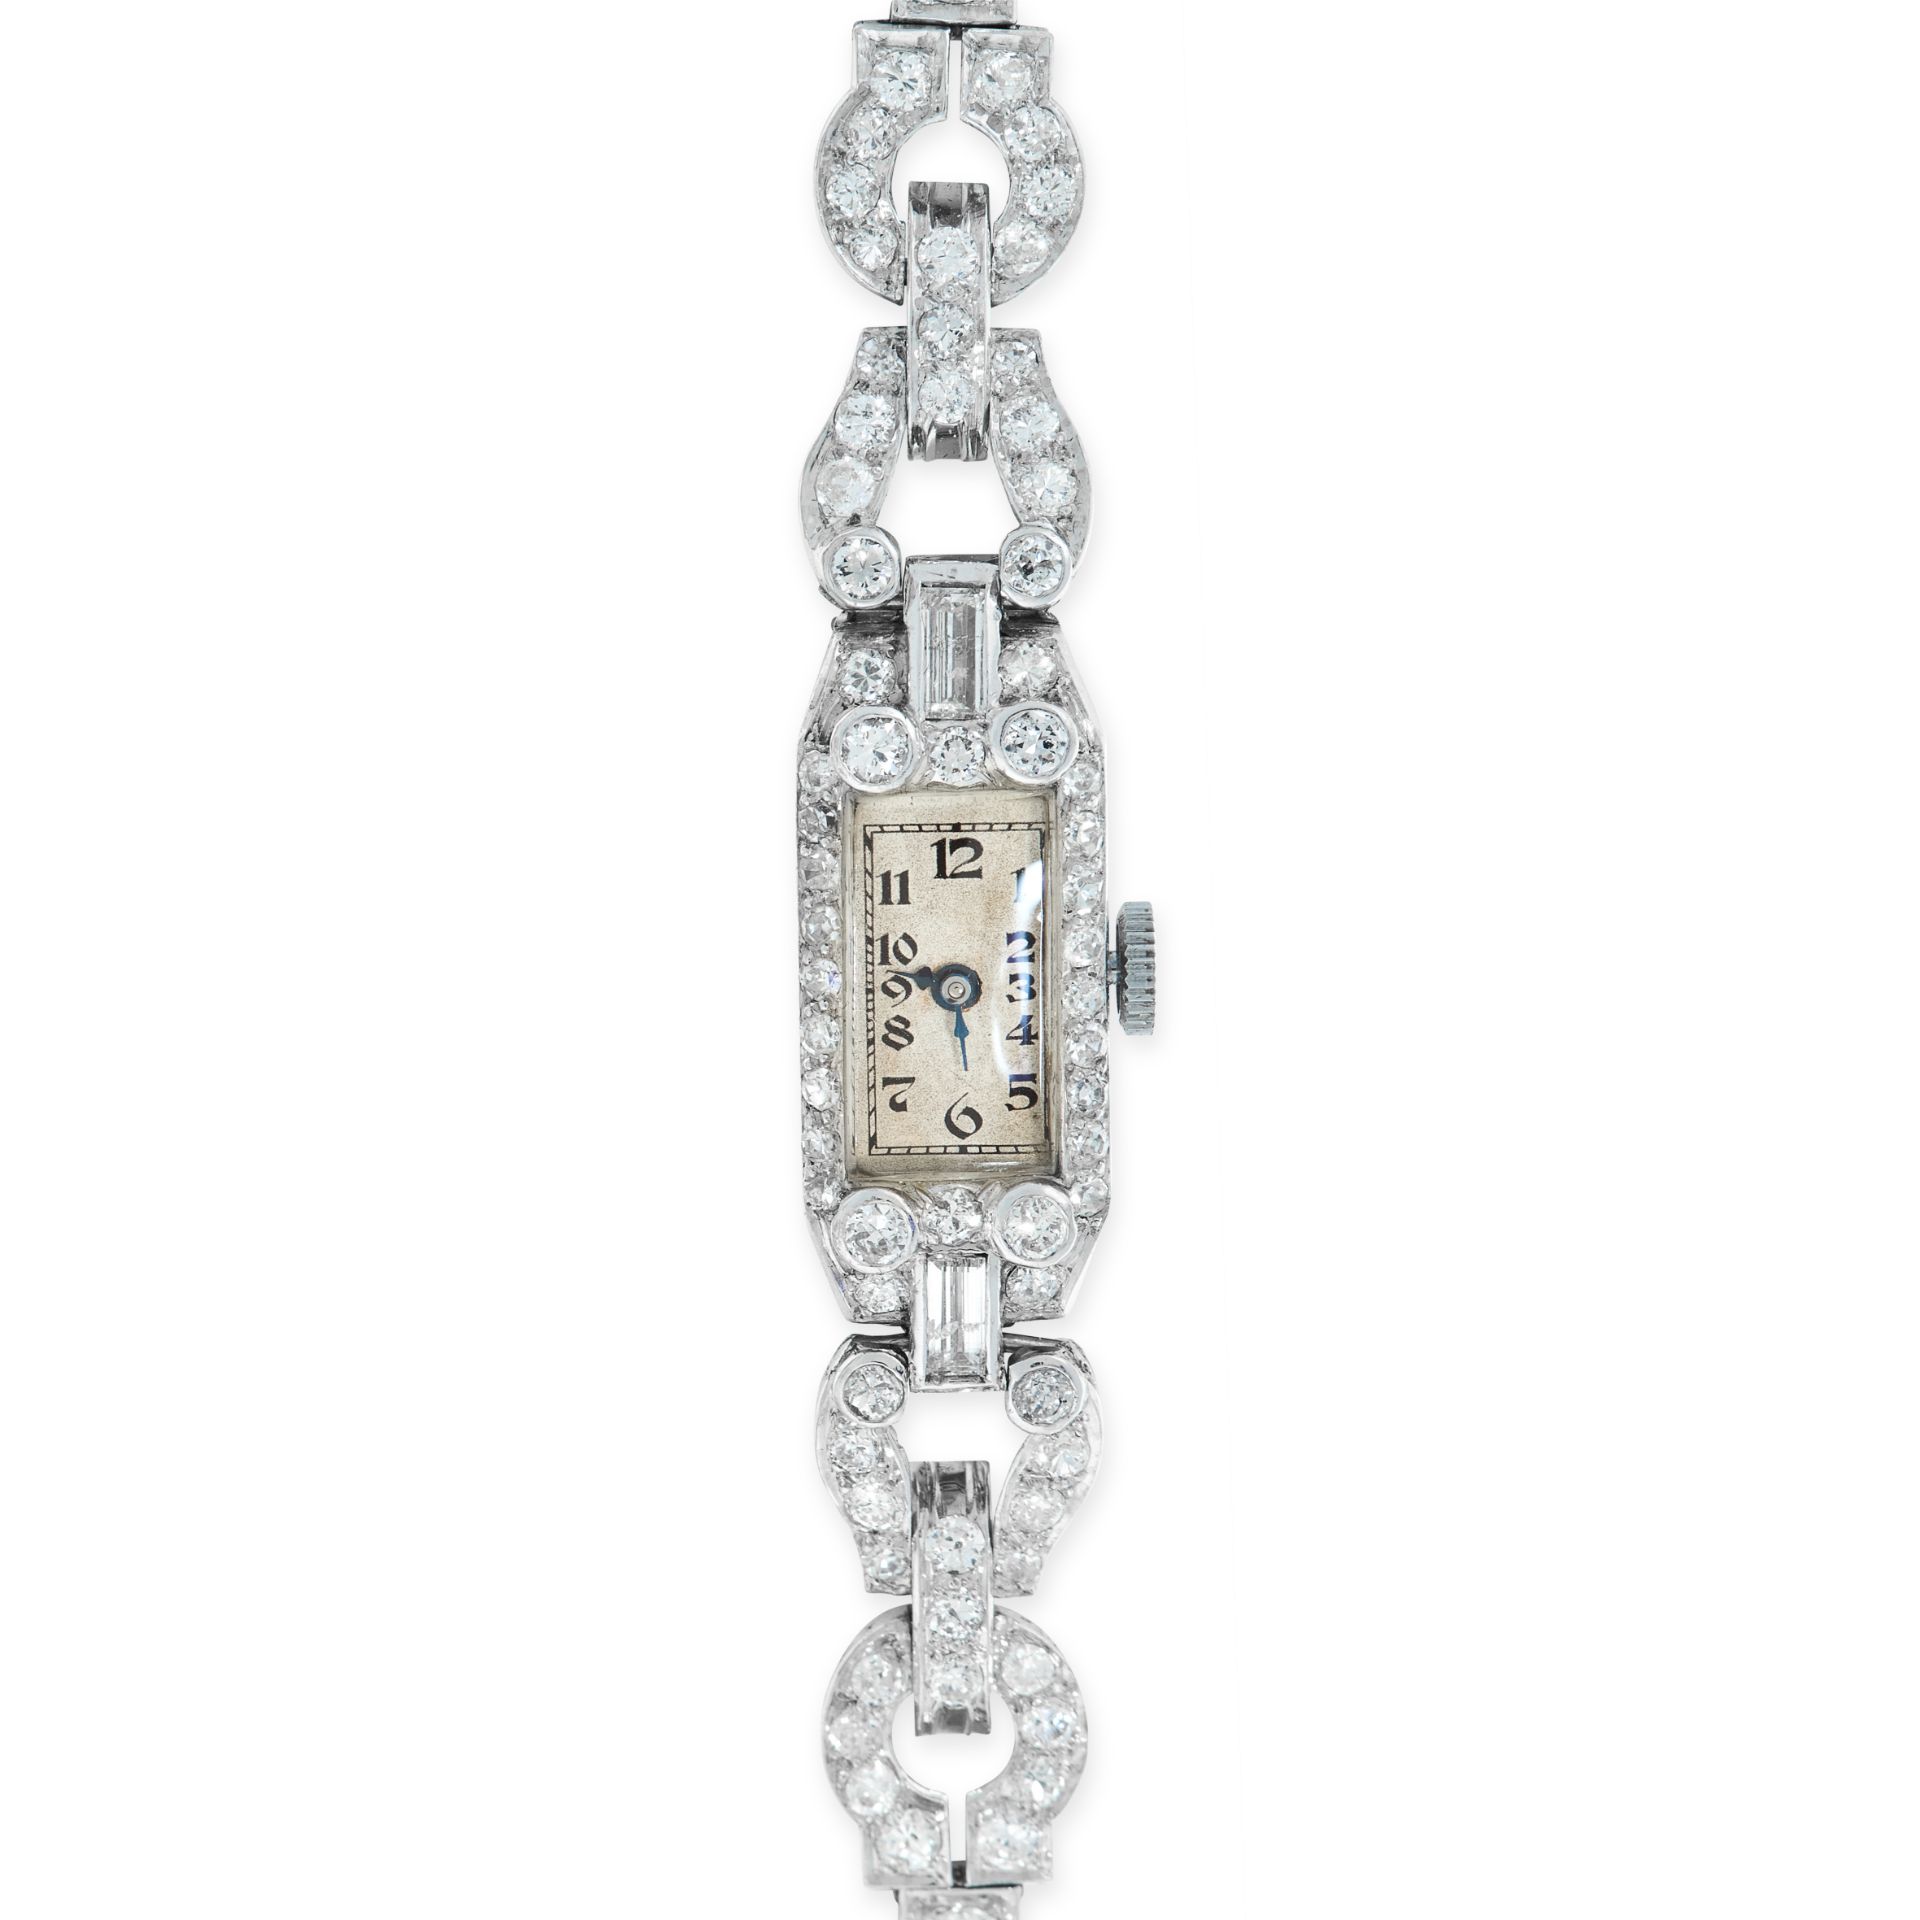 AN ART DECO DIAMOND COCKTAIL WATCH, EARLY 20TH CENTURY in platinum the rectangular face accented